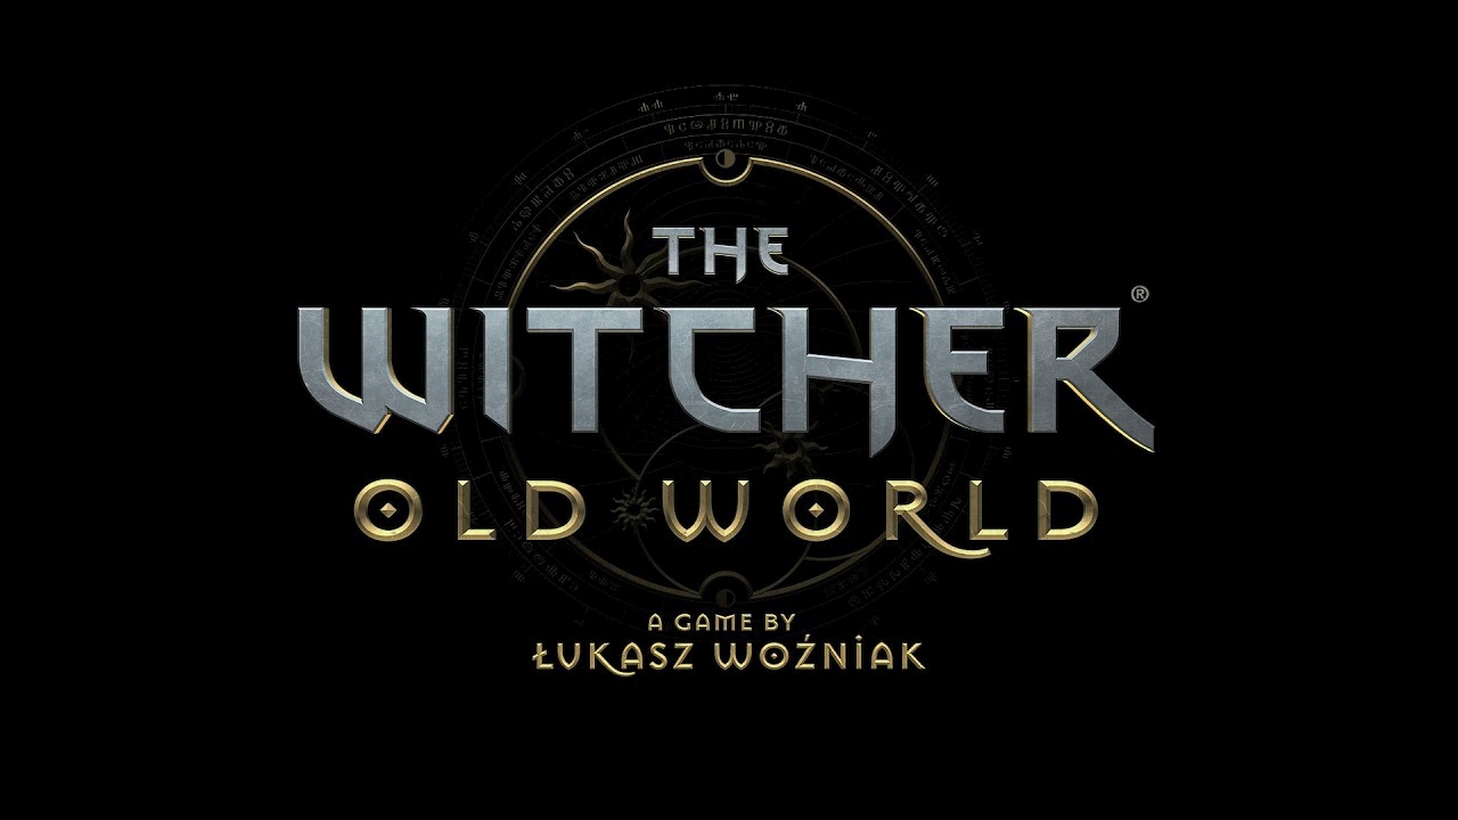 CD Projekt Red And Go On Board Announce The Witcher: Old World Board Game